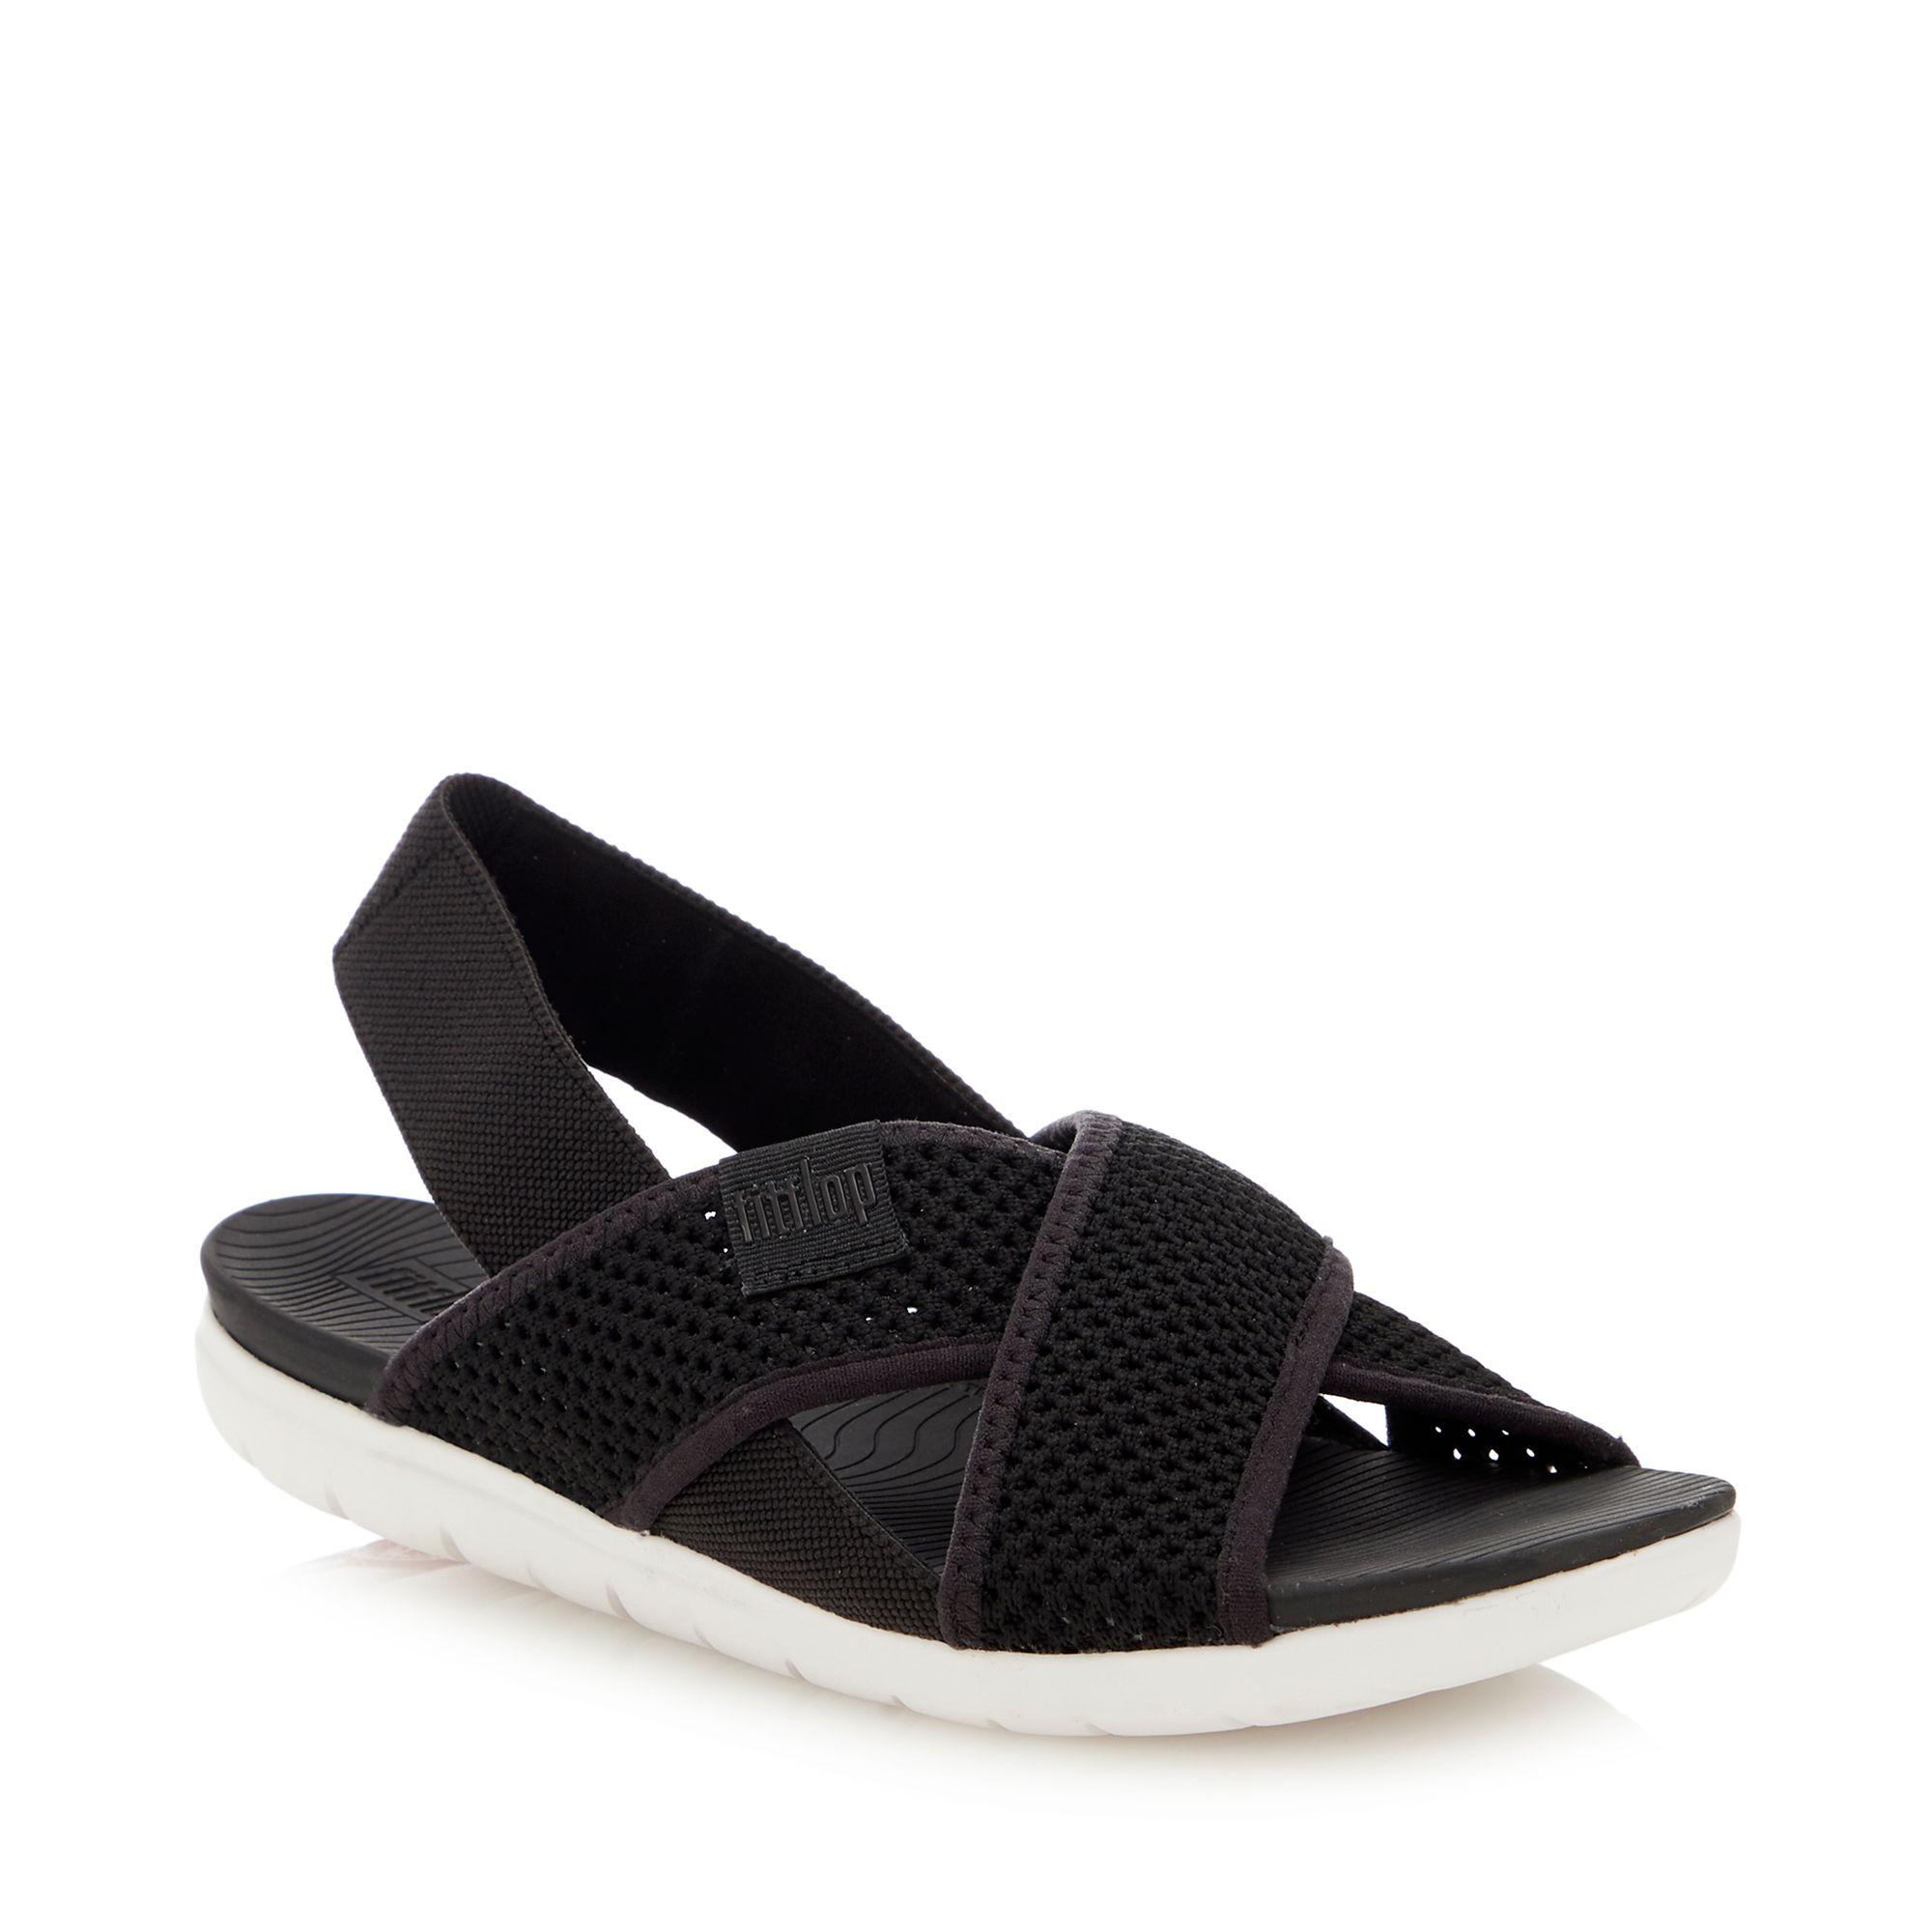 Fitflop 'airmesh' Slingback Sandals in Black - Lyst